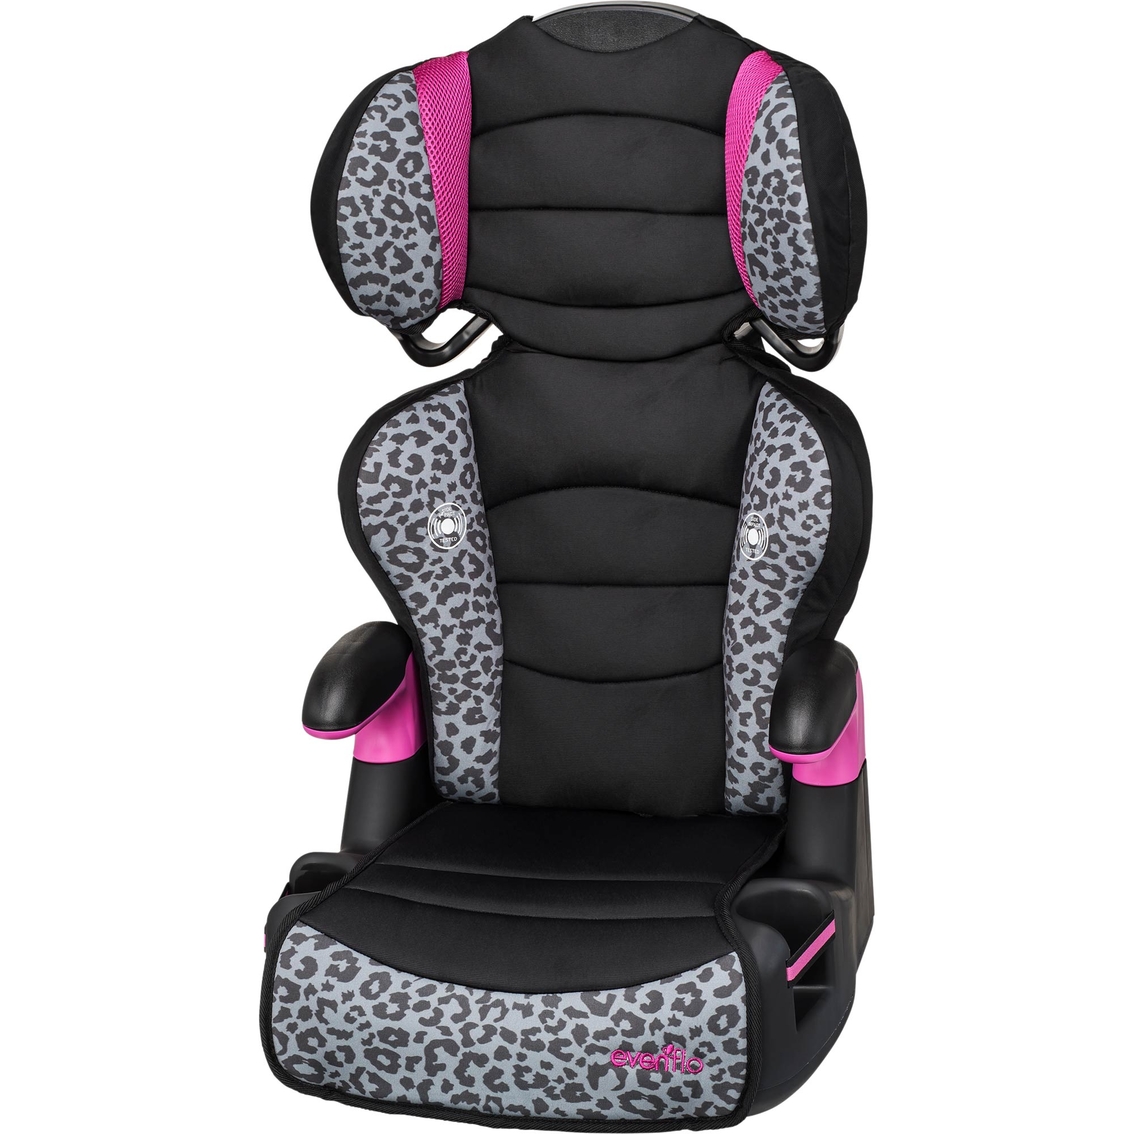 Booster Seat Toys 17